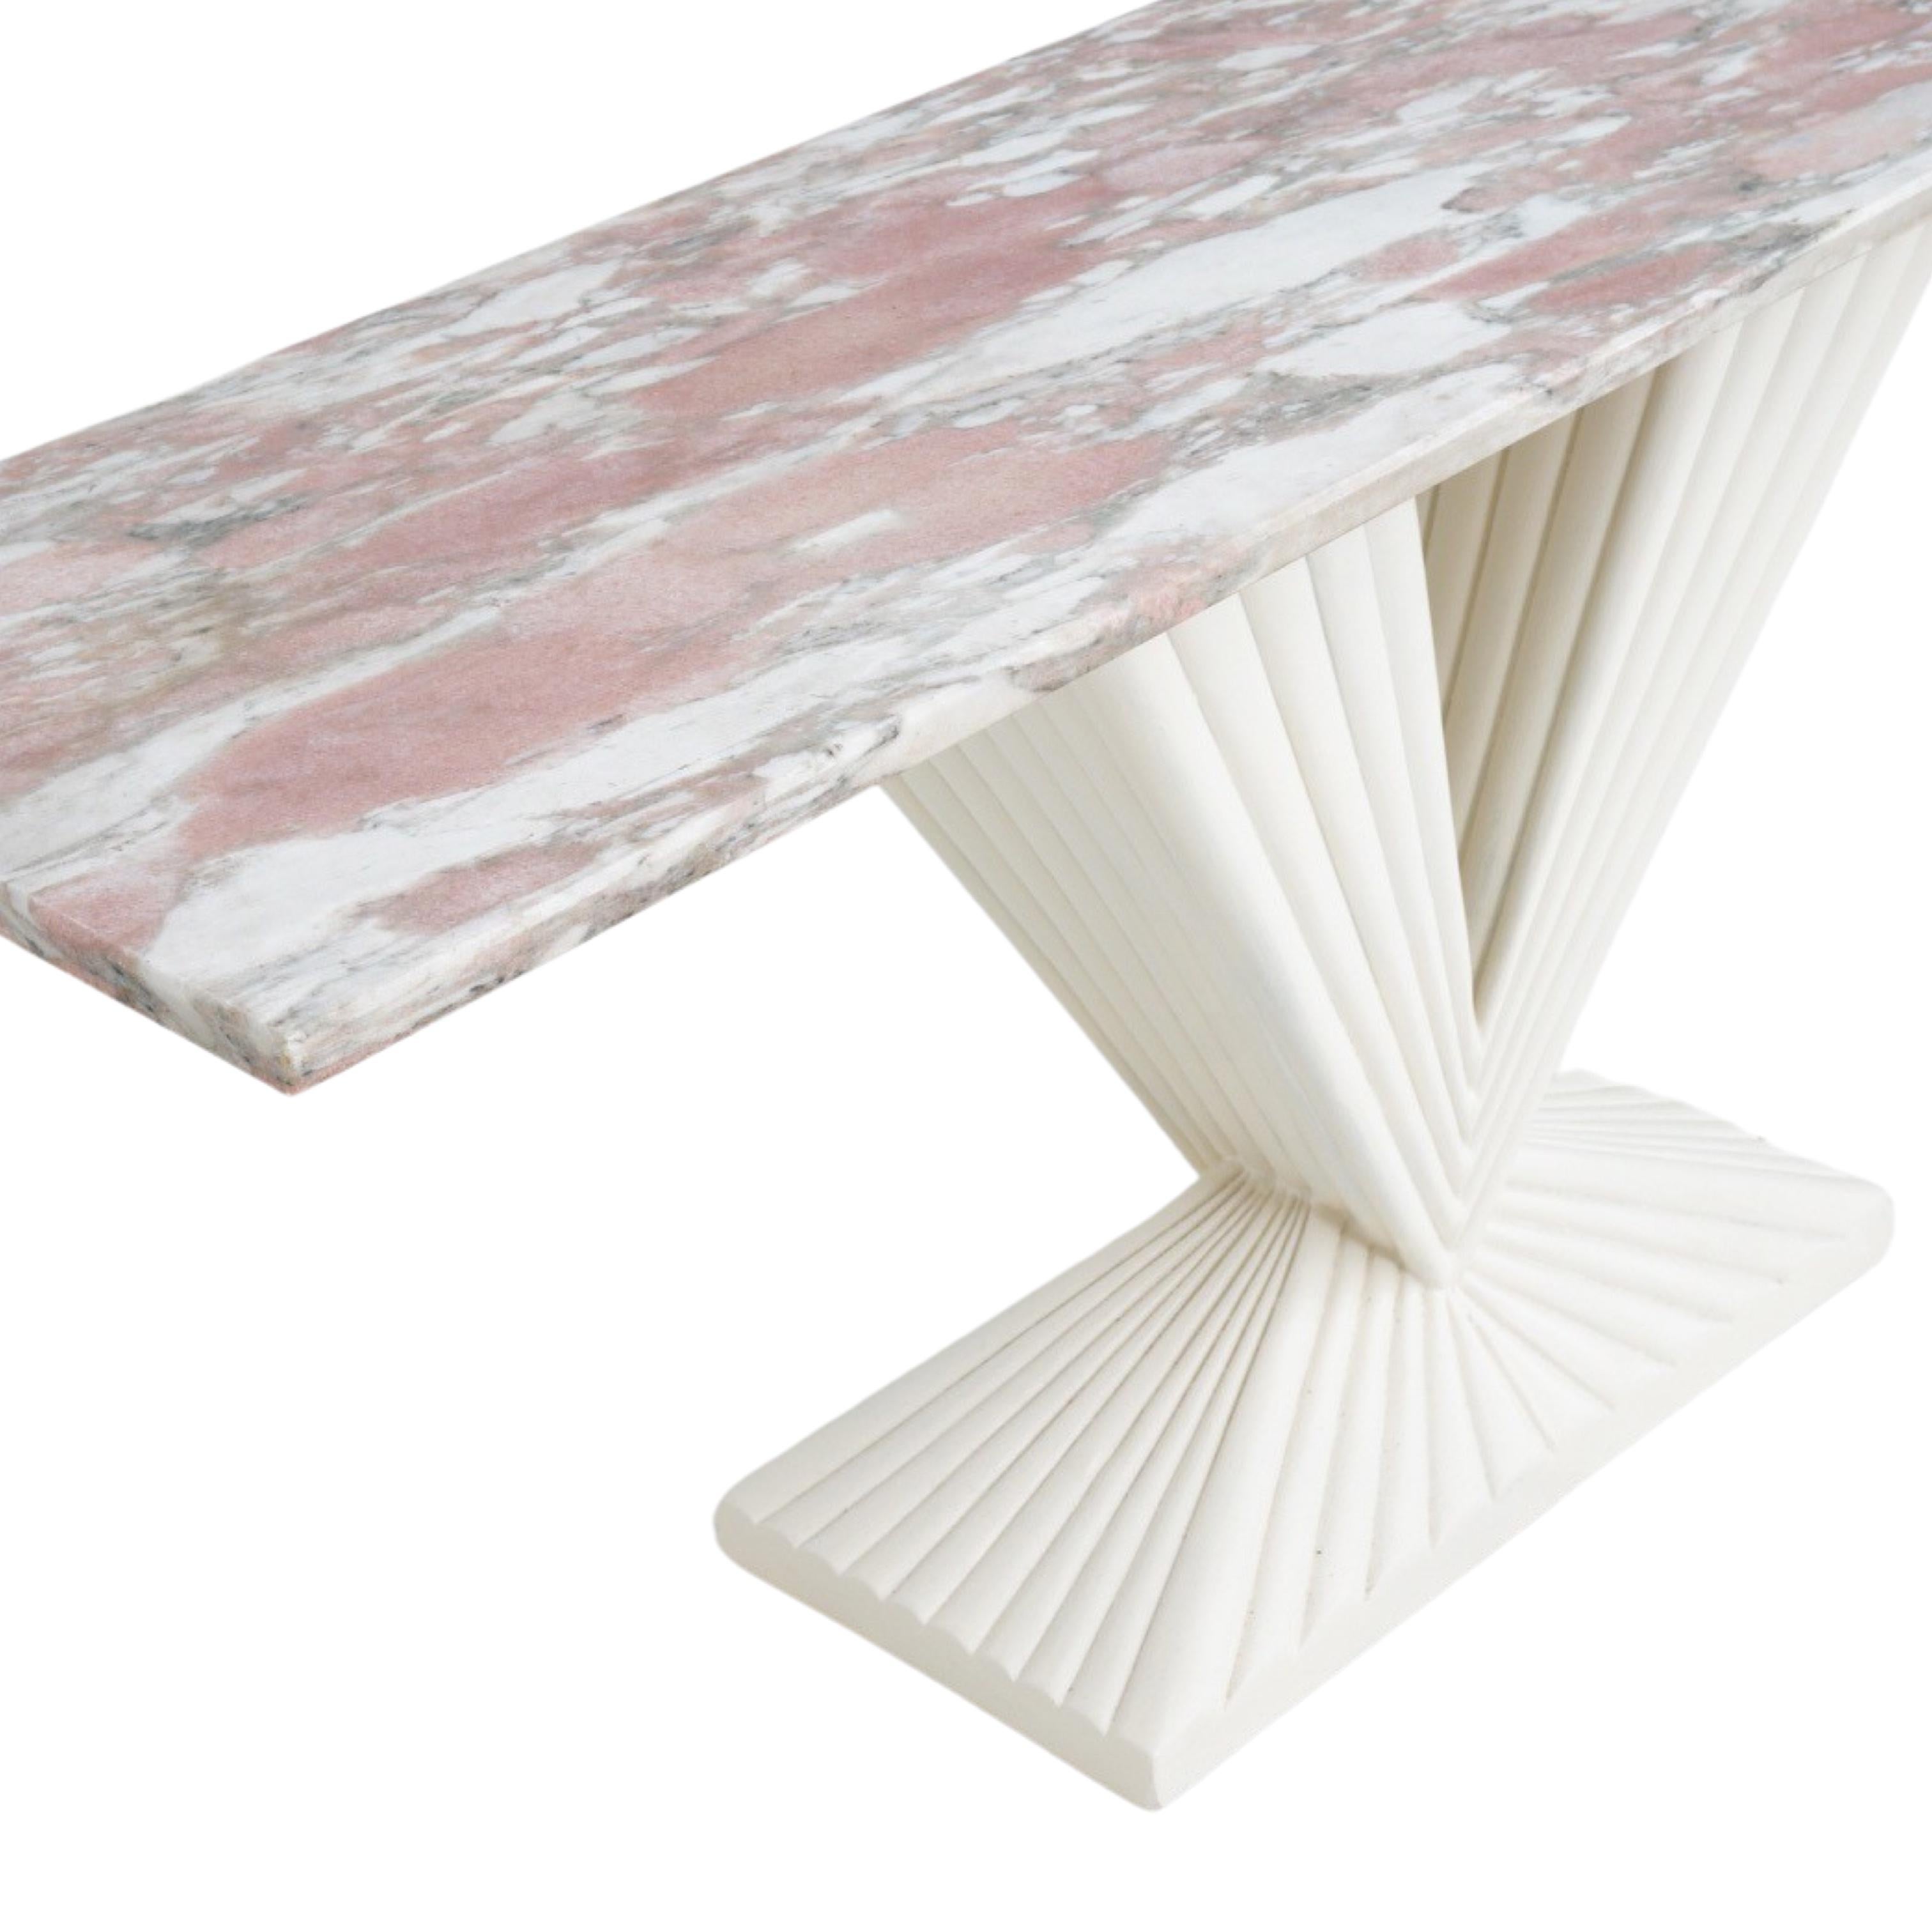 With its bubblegum hue and intricate veined marble top, this console table strikes a delicate balance between flamboyance and elegance. The veined marble, with a soft blend of colors and flowing veins, creates a sense of serenity and refinement.